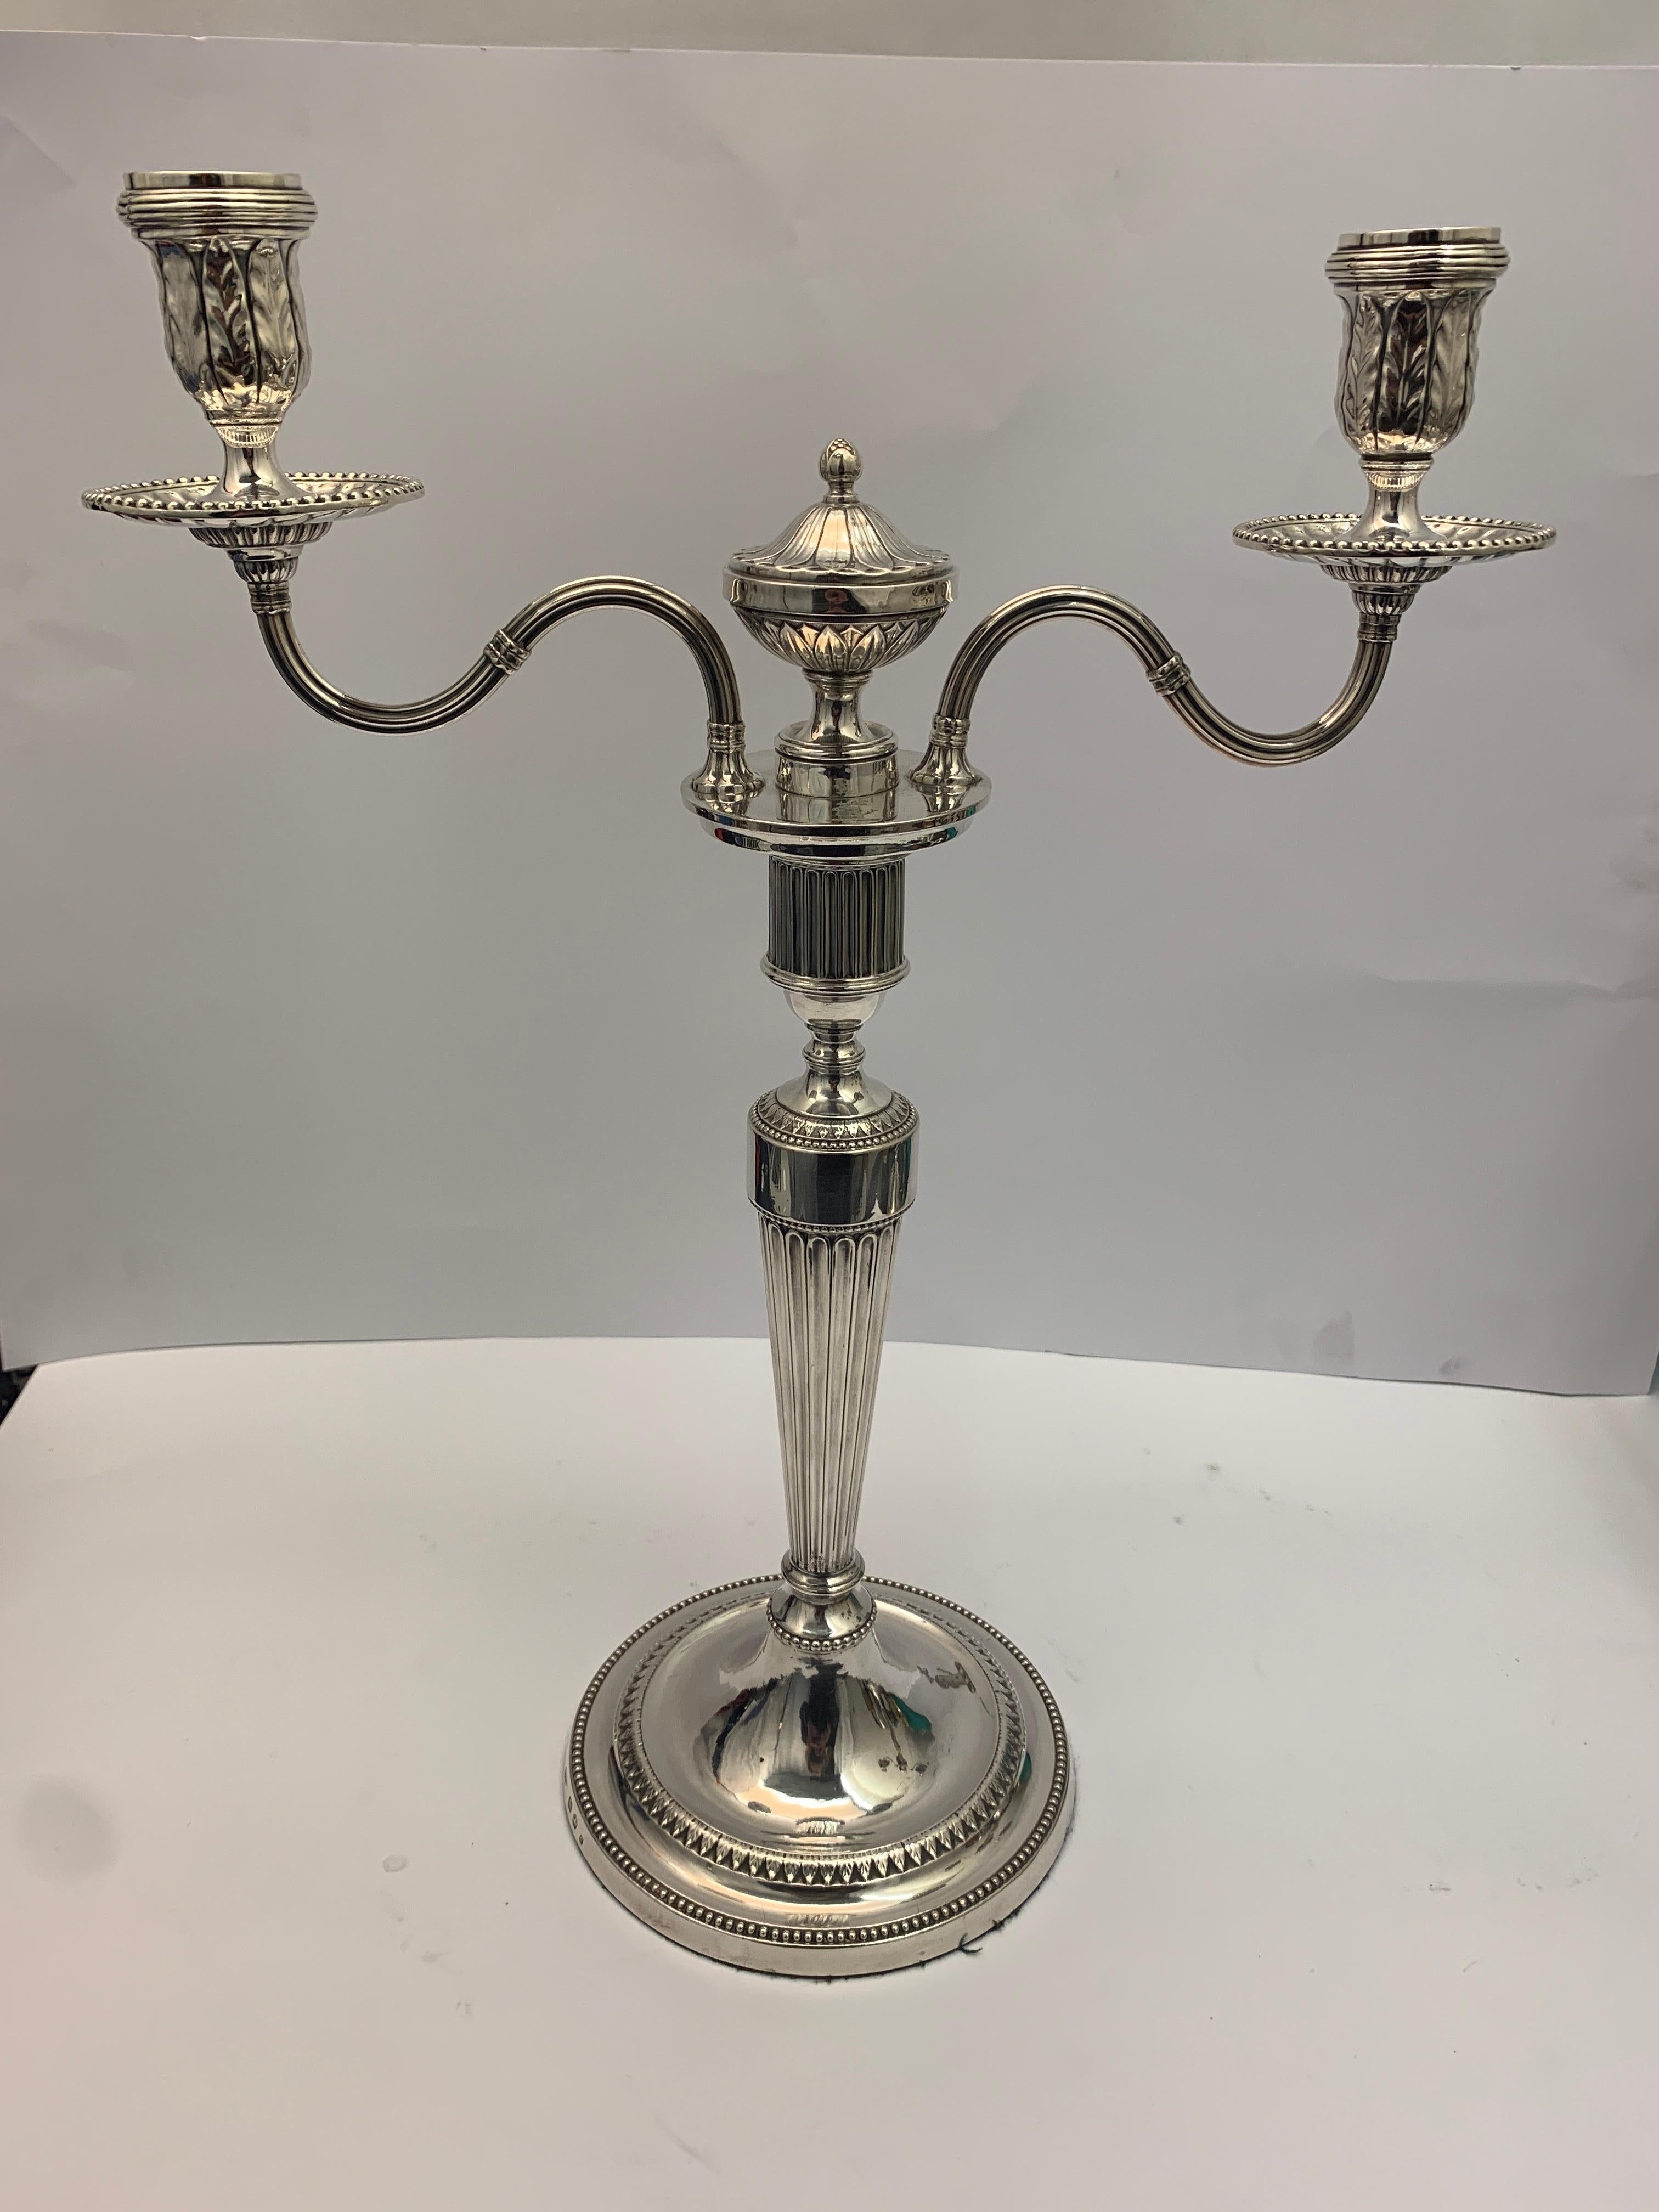 A large pair of double candlesticks dated 1780. 

Hallmarked on base.